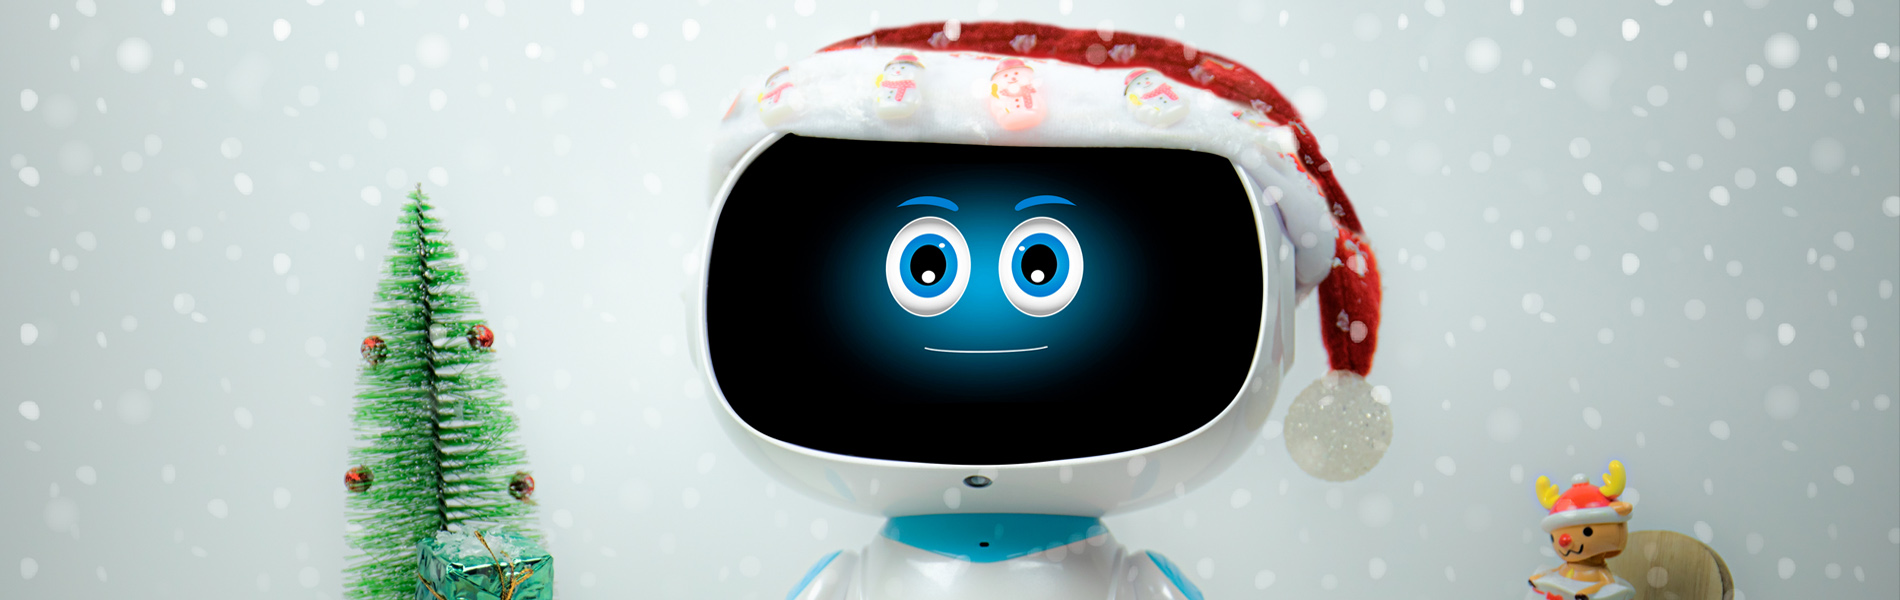 Why The Misa Robot Is the Best Christmas Gift for Kids and Family